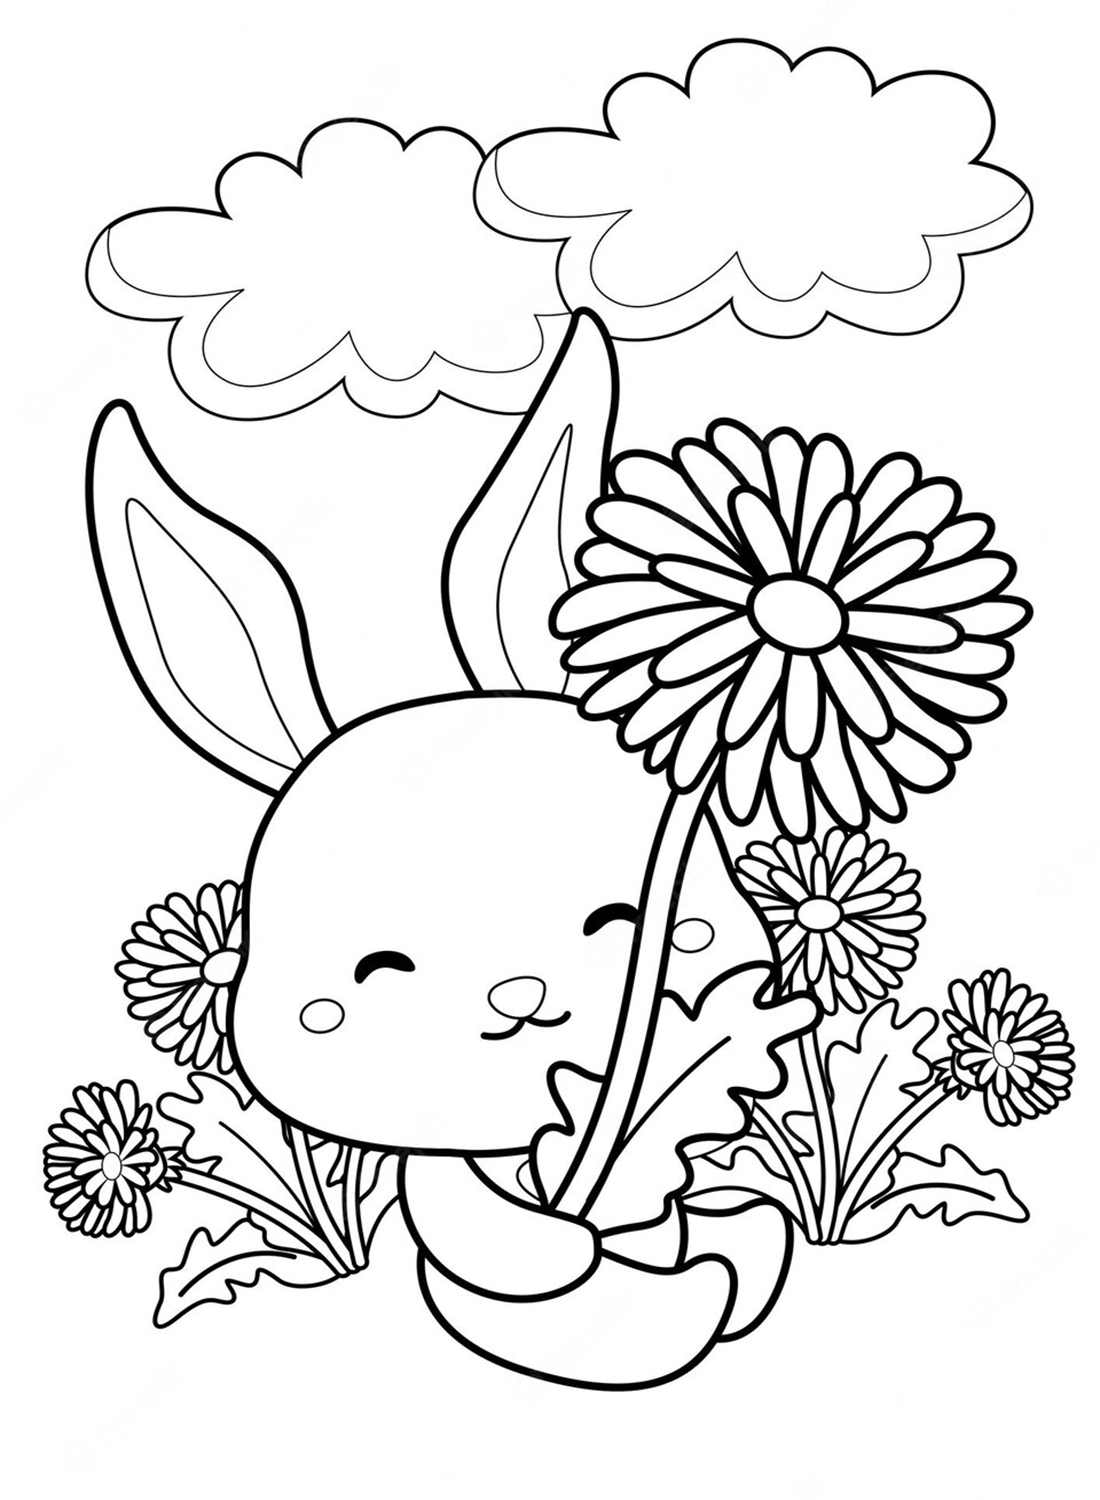 Girl Rabbit With Flowers from Rabbit